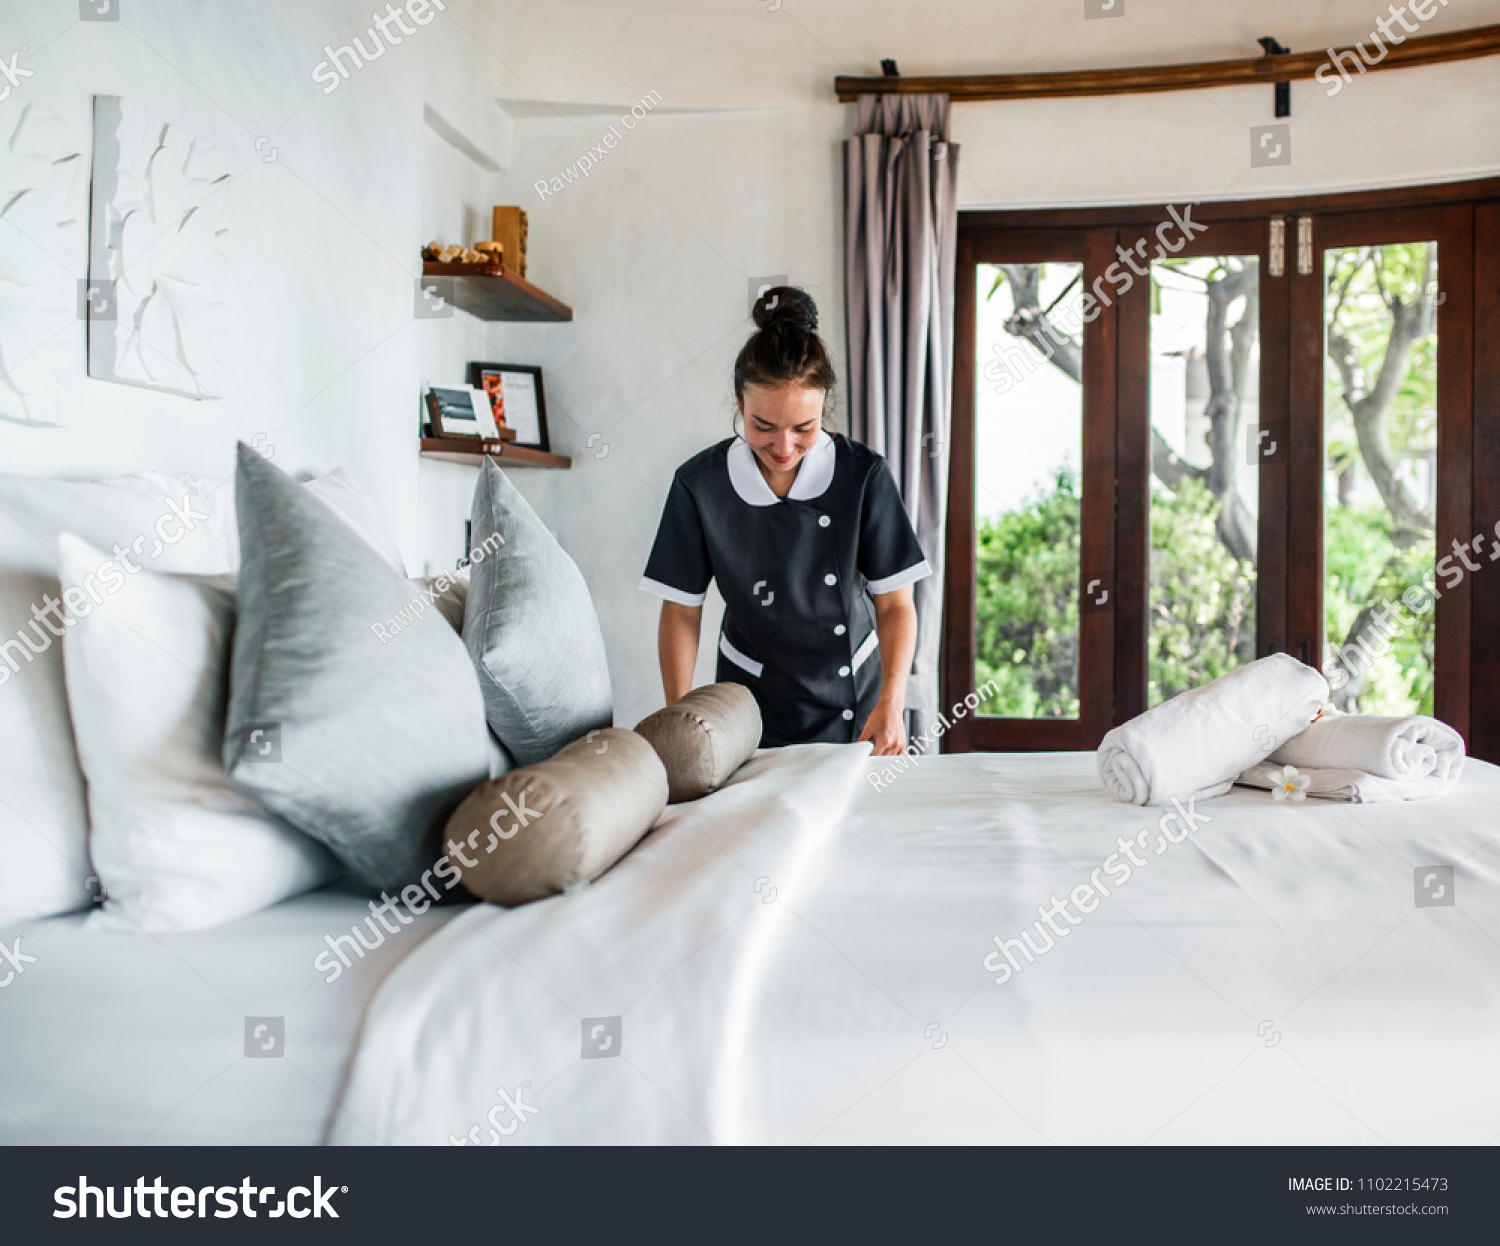 Housekeeper cleaning a hotel room #1102215473